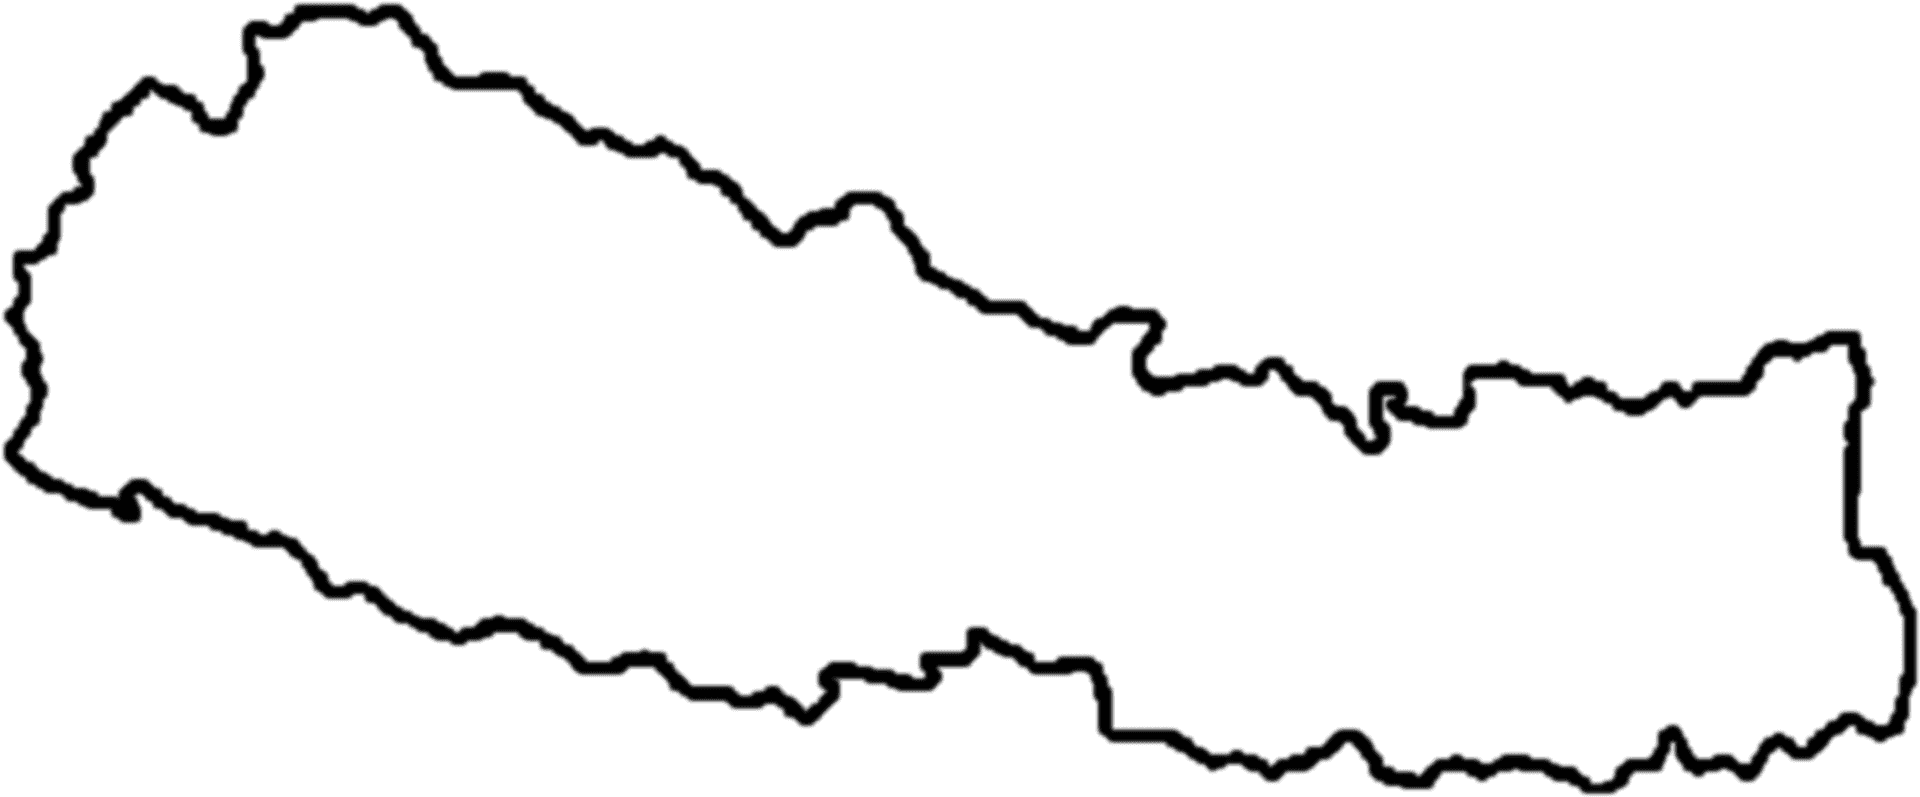 Nepal_ Outline_ Map_ Vector PNG image